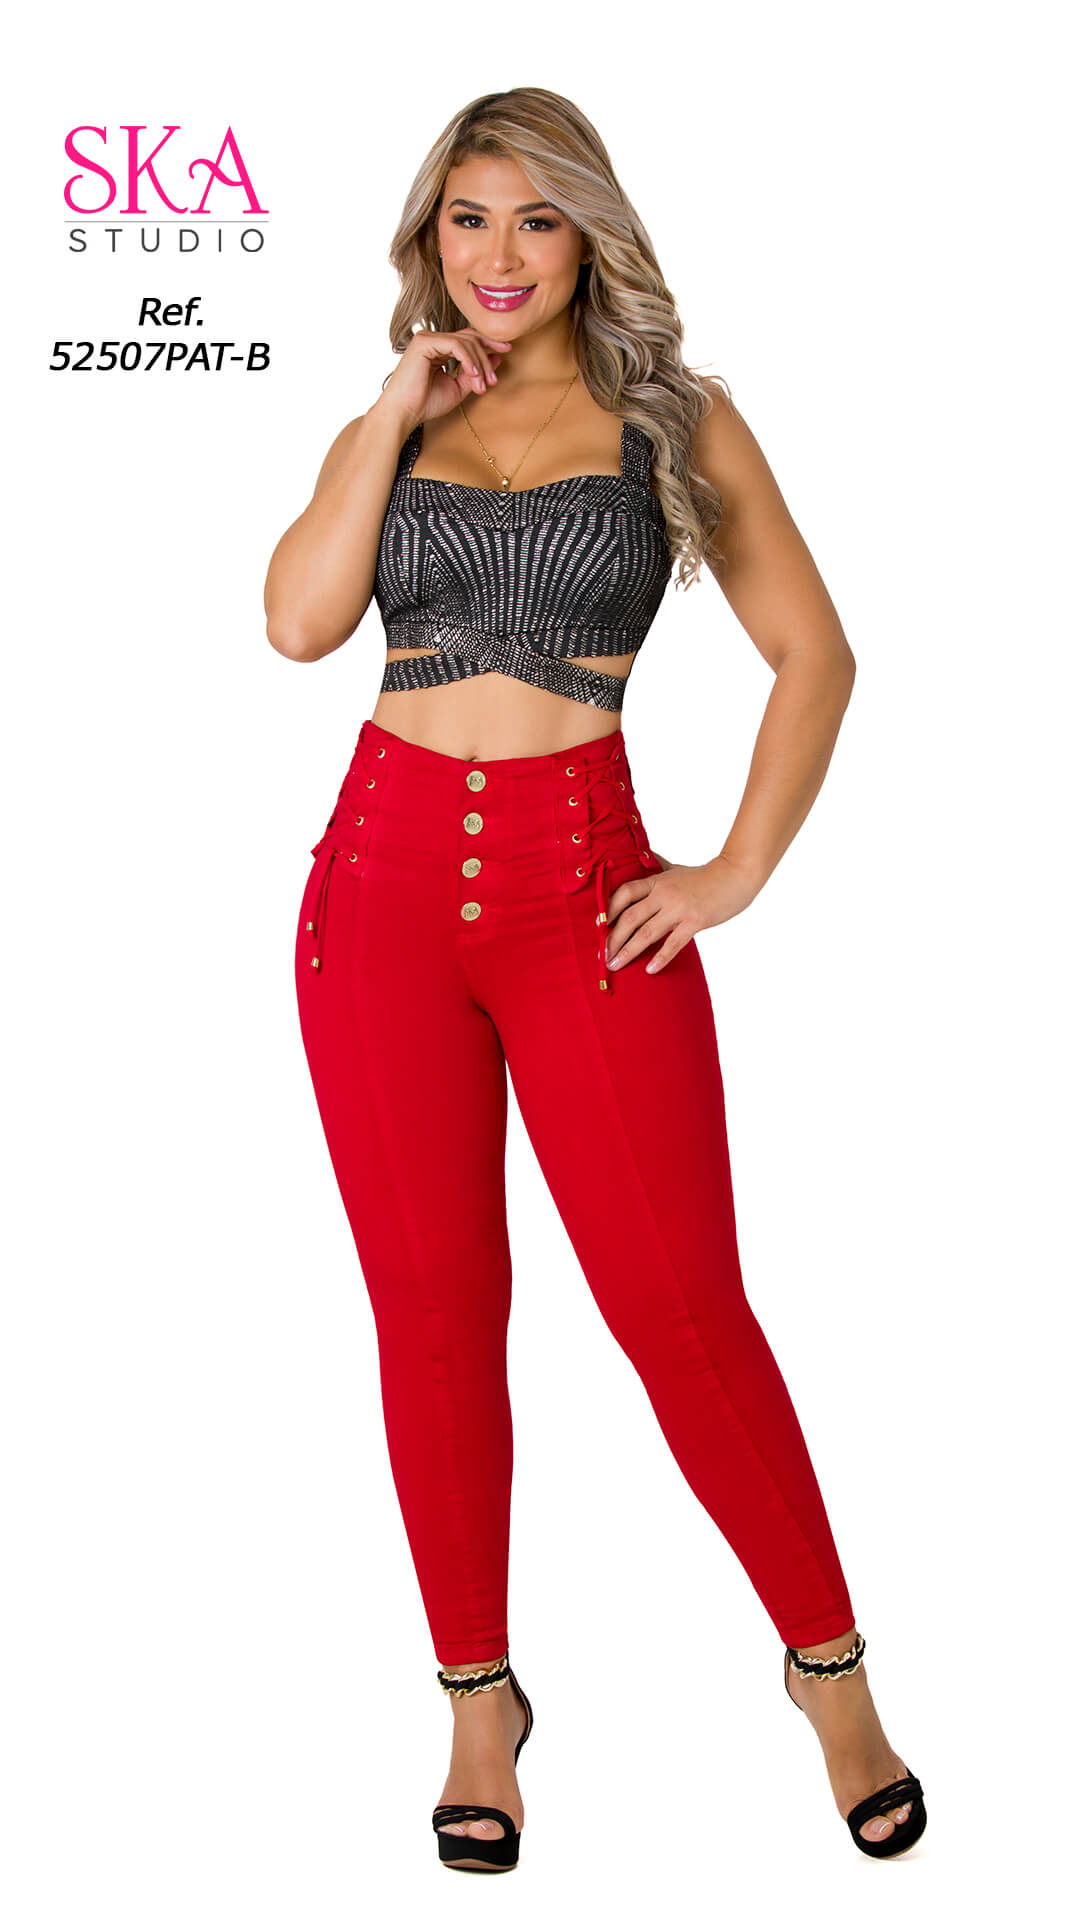 Red High Waisted Butt Lifting Jeans for Women